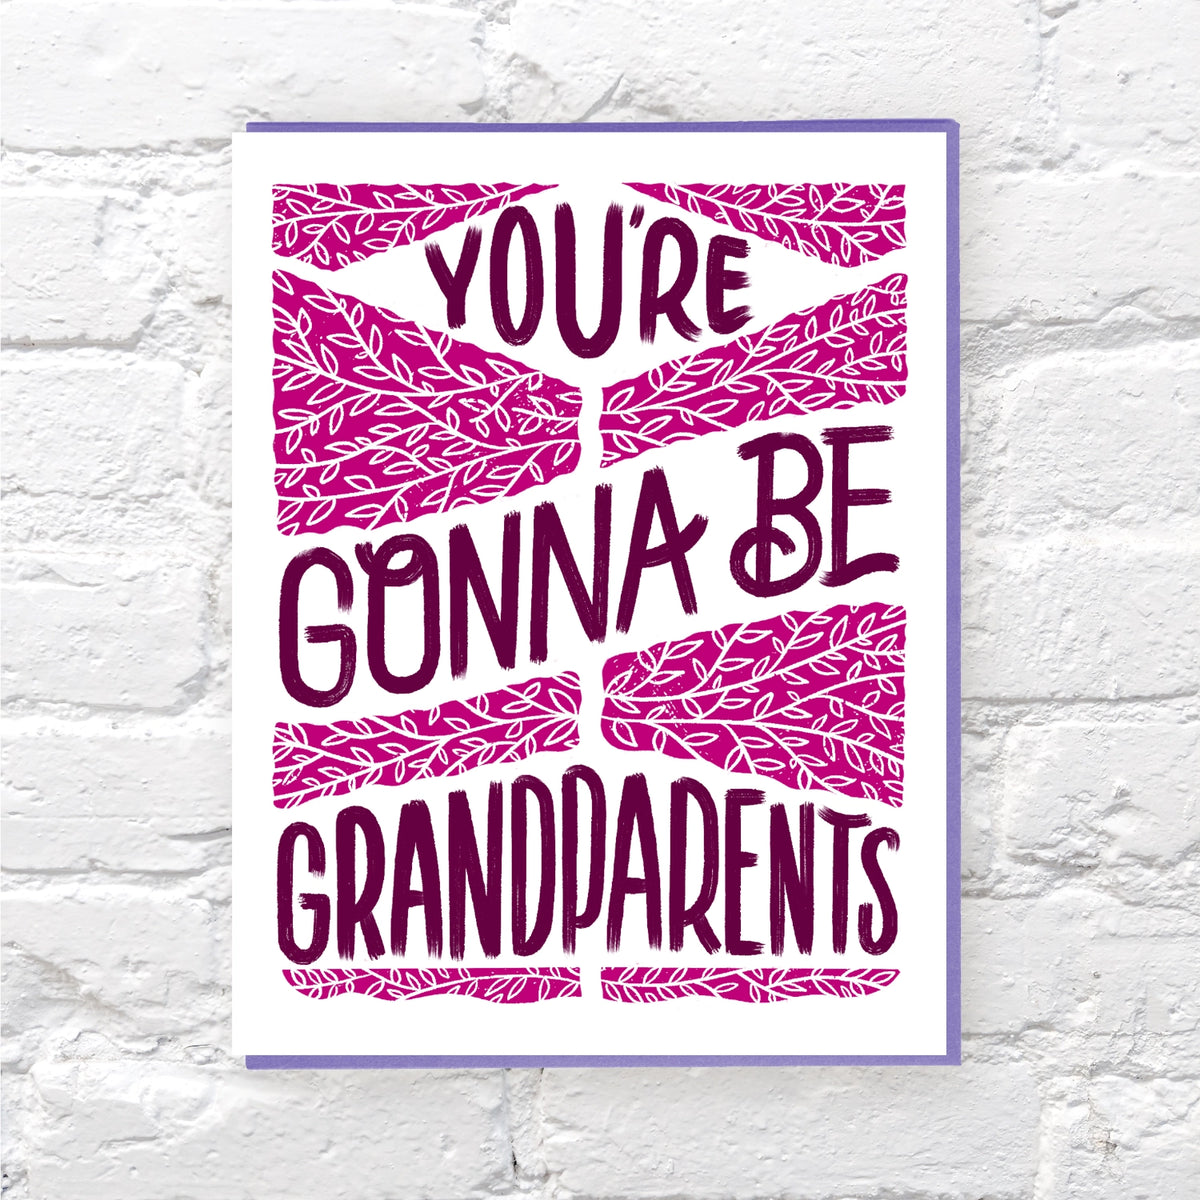 Gonna Be Grandparents New Baby Card